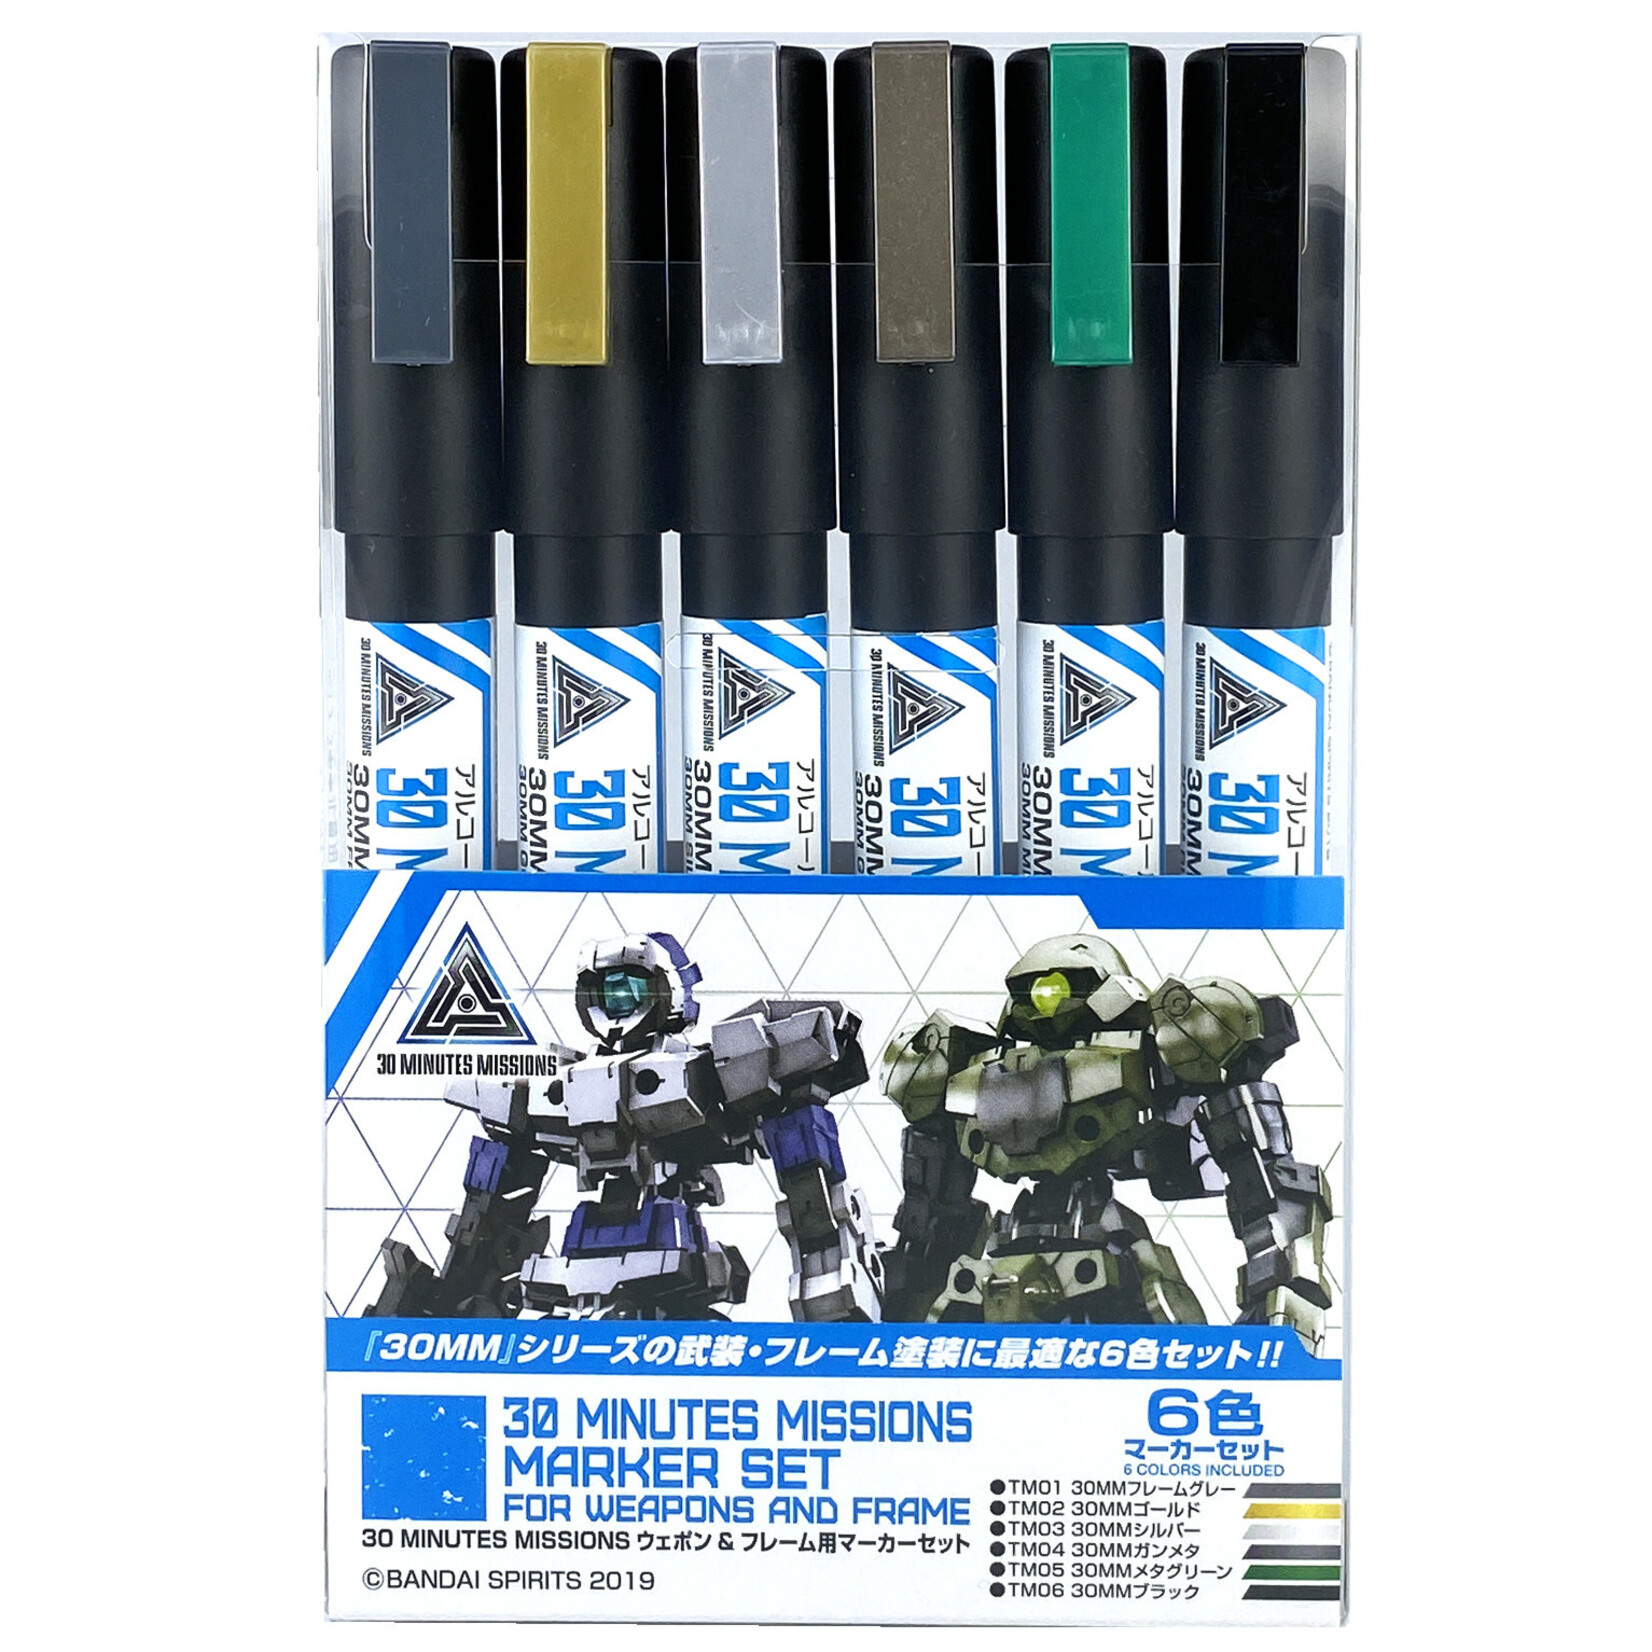 GNZ 30 MINUTE MISSIONS WEAPON AND FRAME MARKER SET